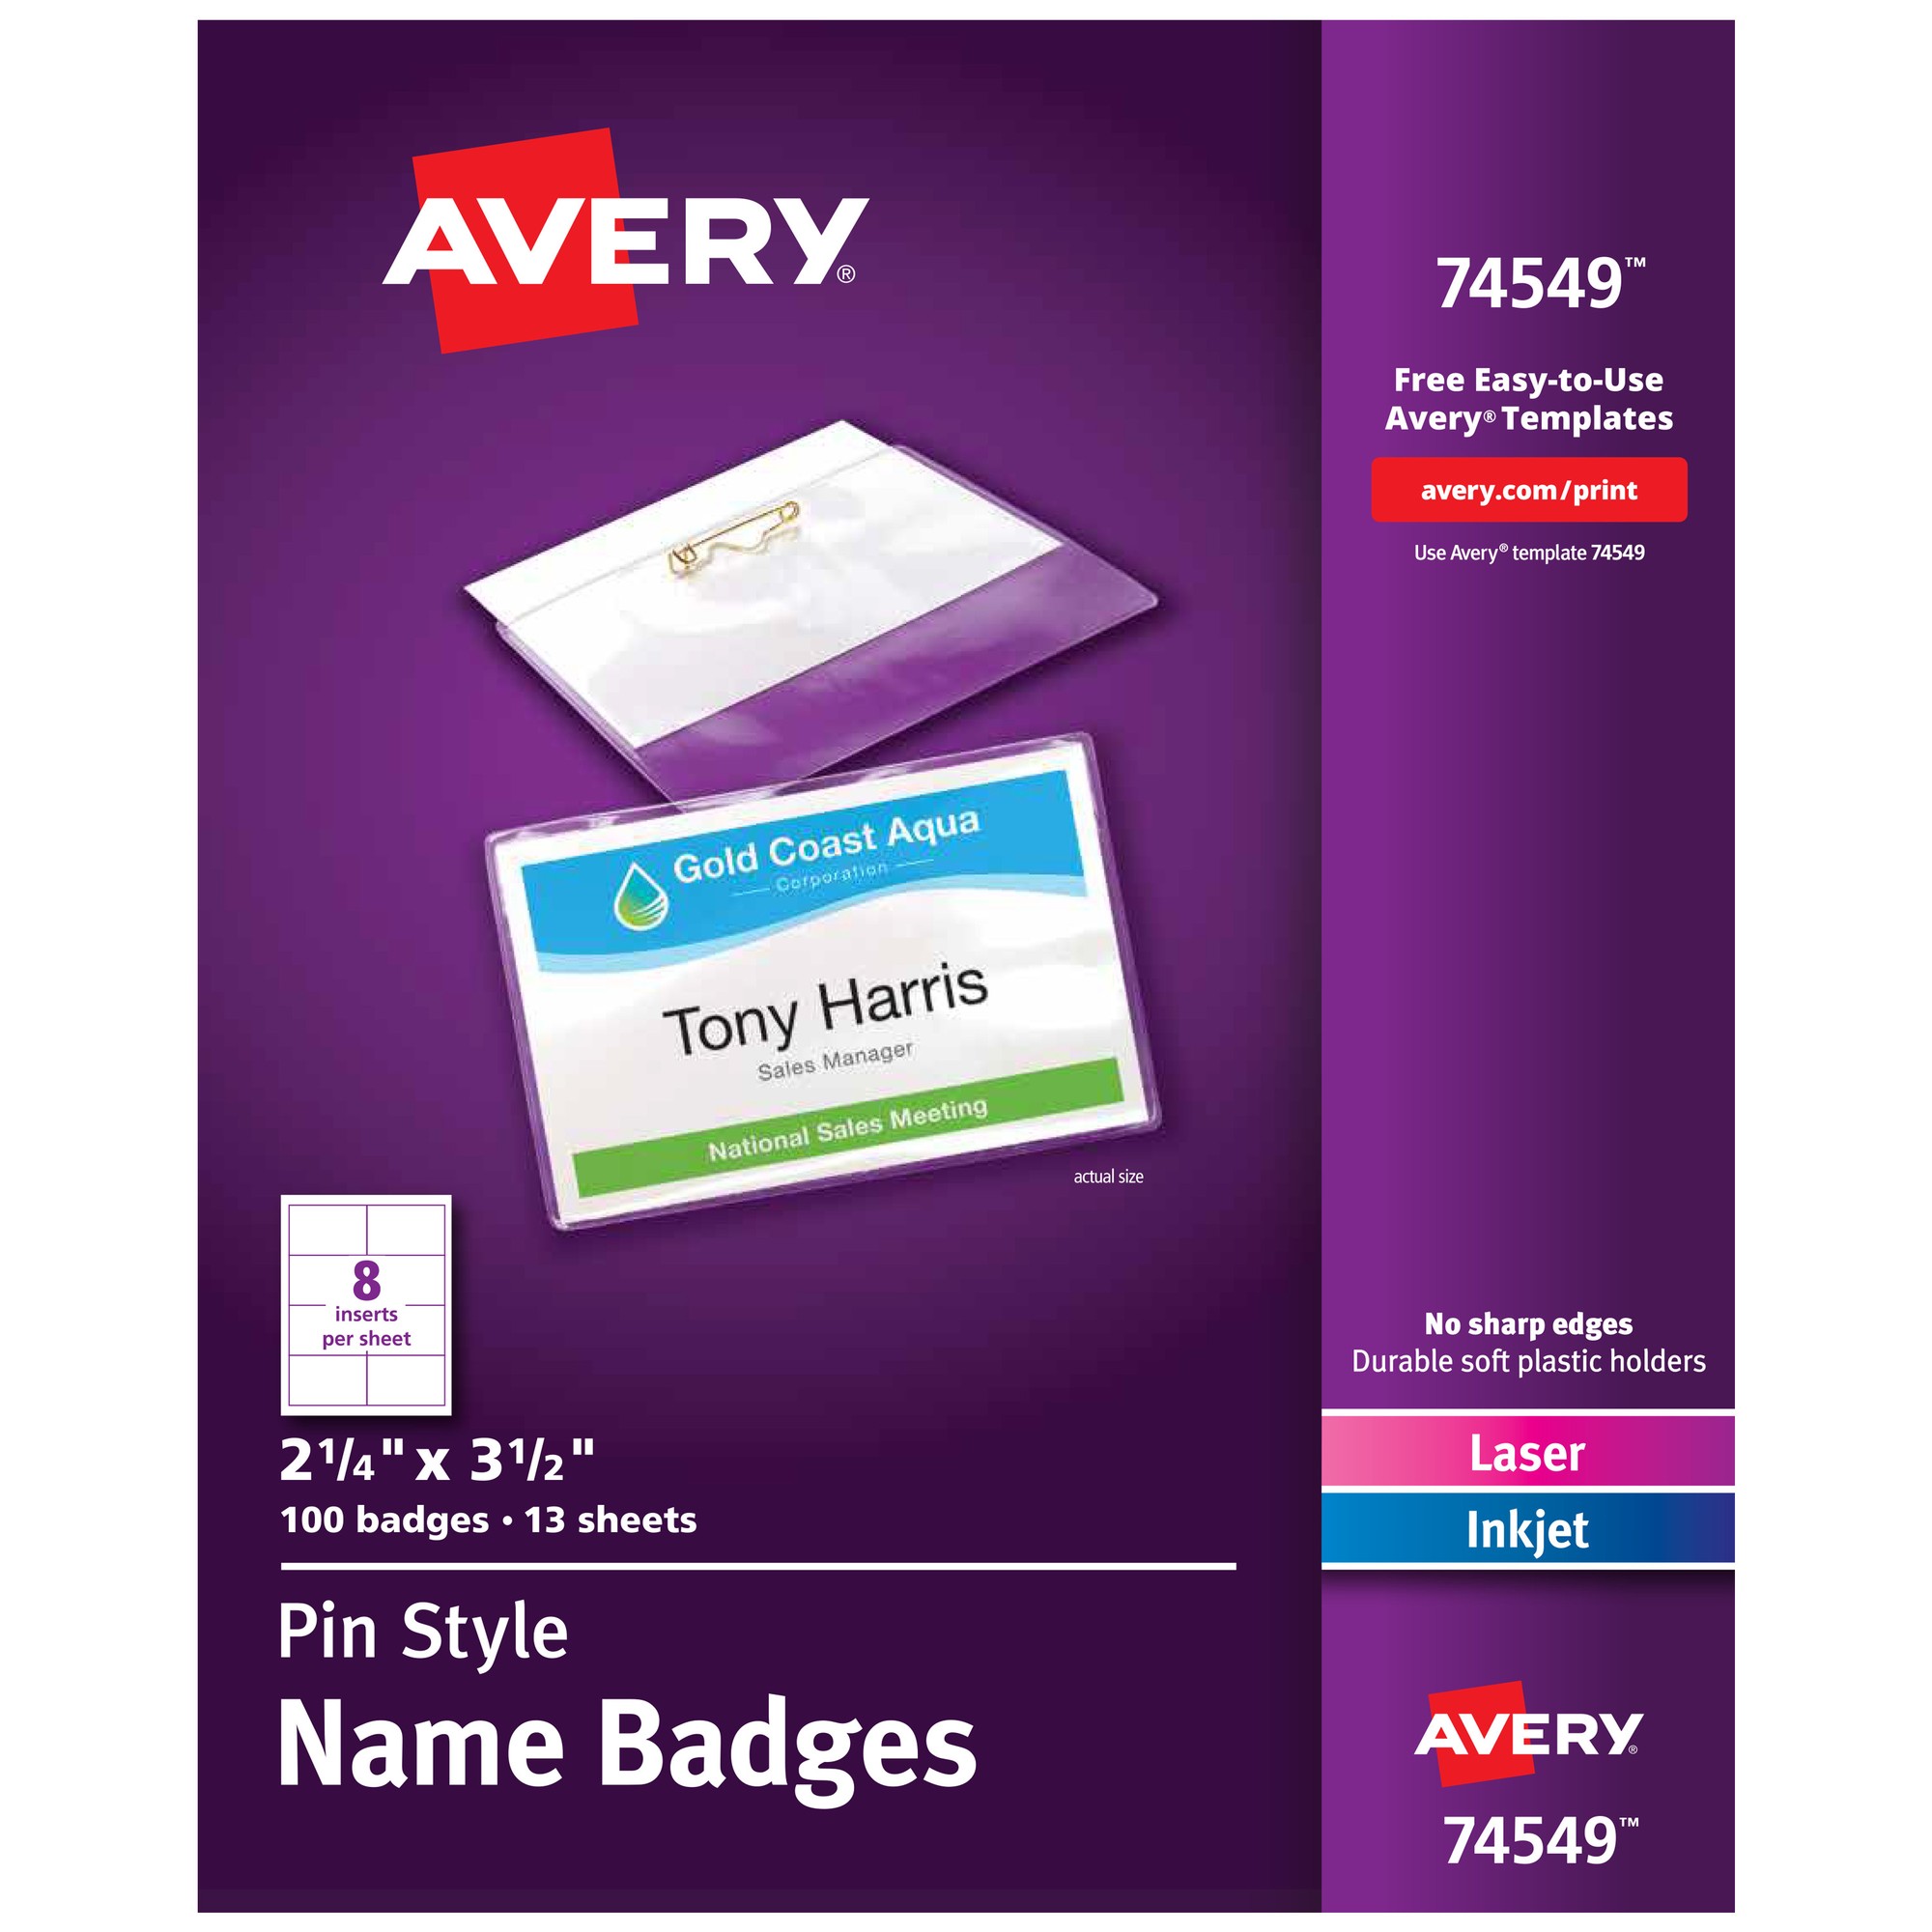 Avery Pin-Style Name Badges - 3 1/2" x 2 1/4" - 100 / Box